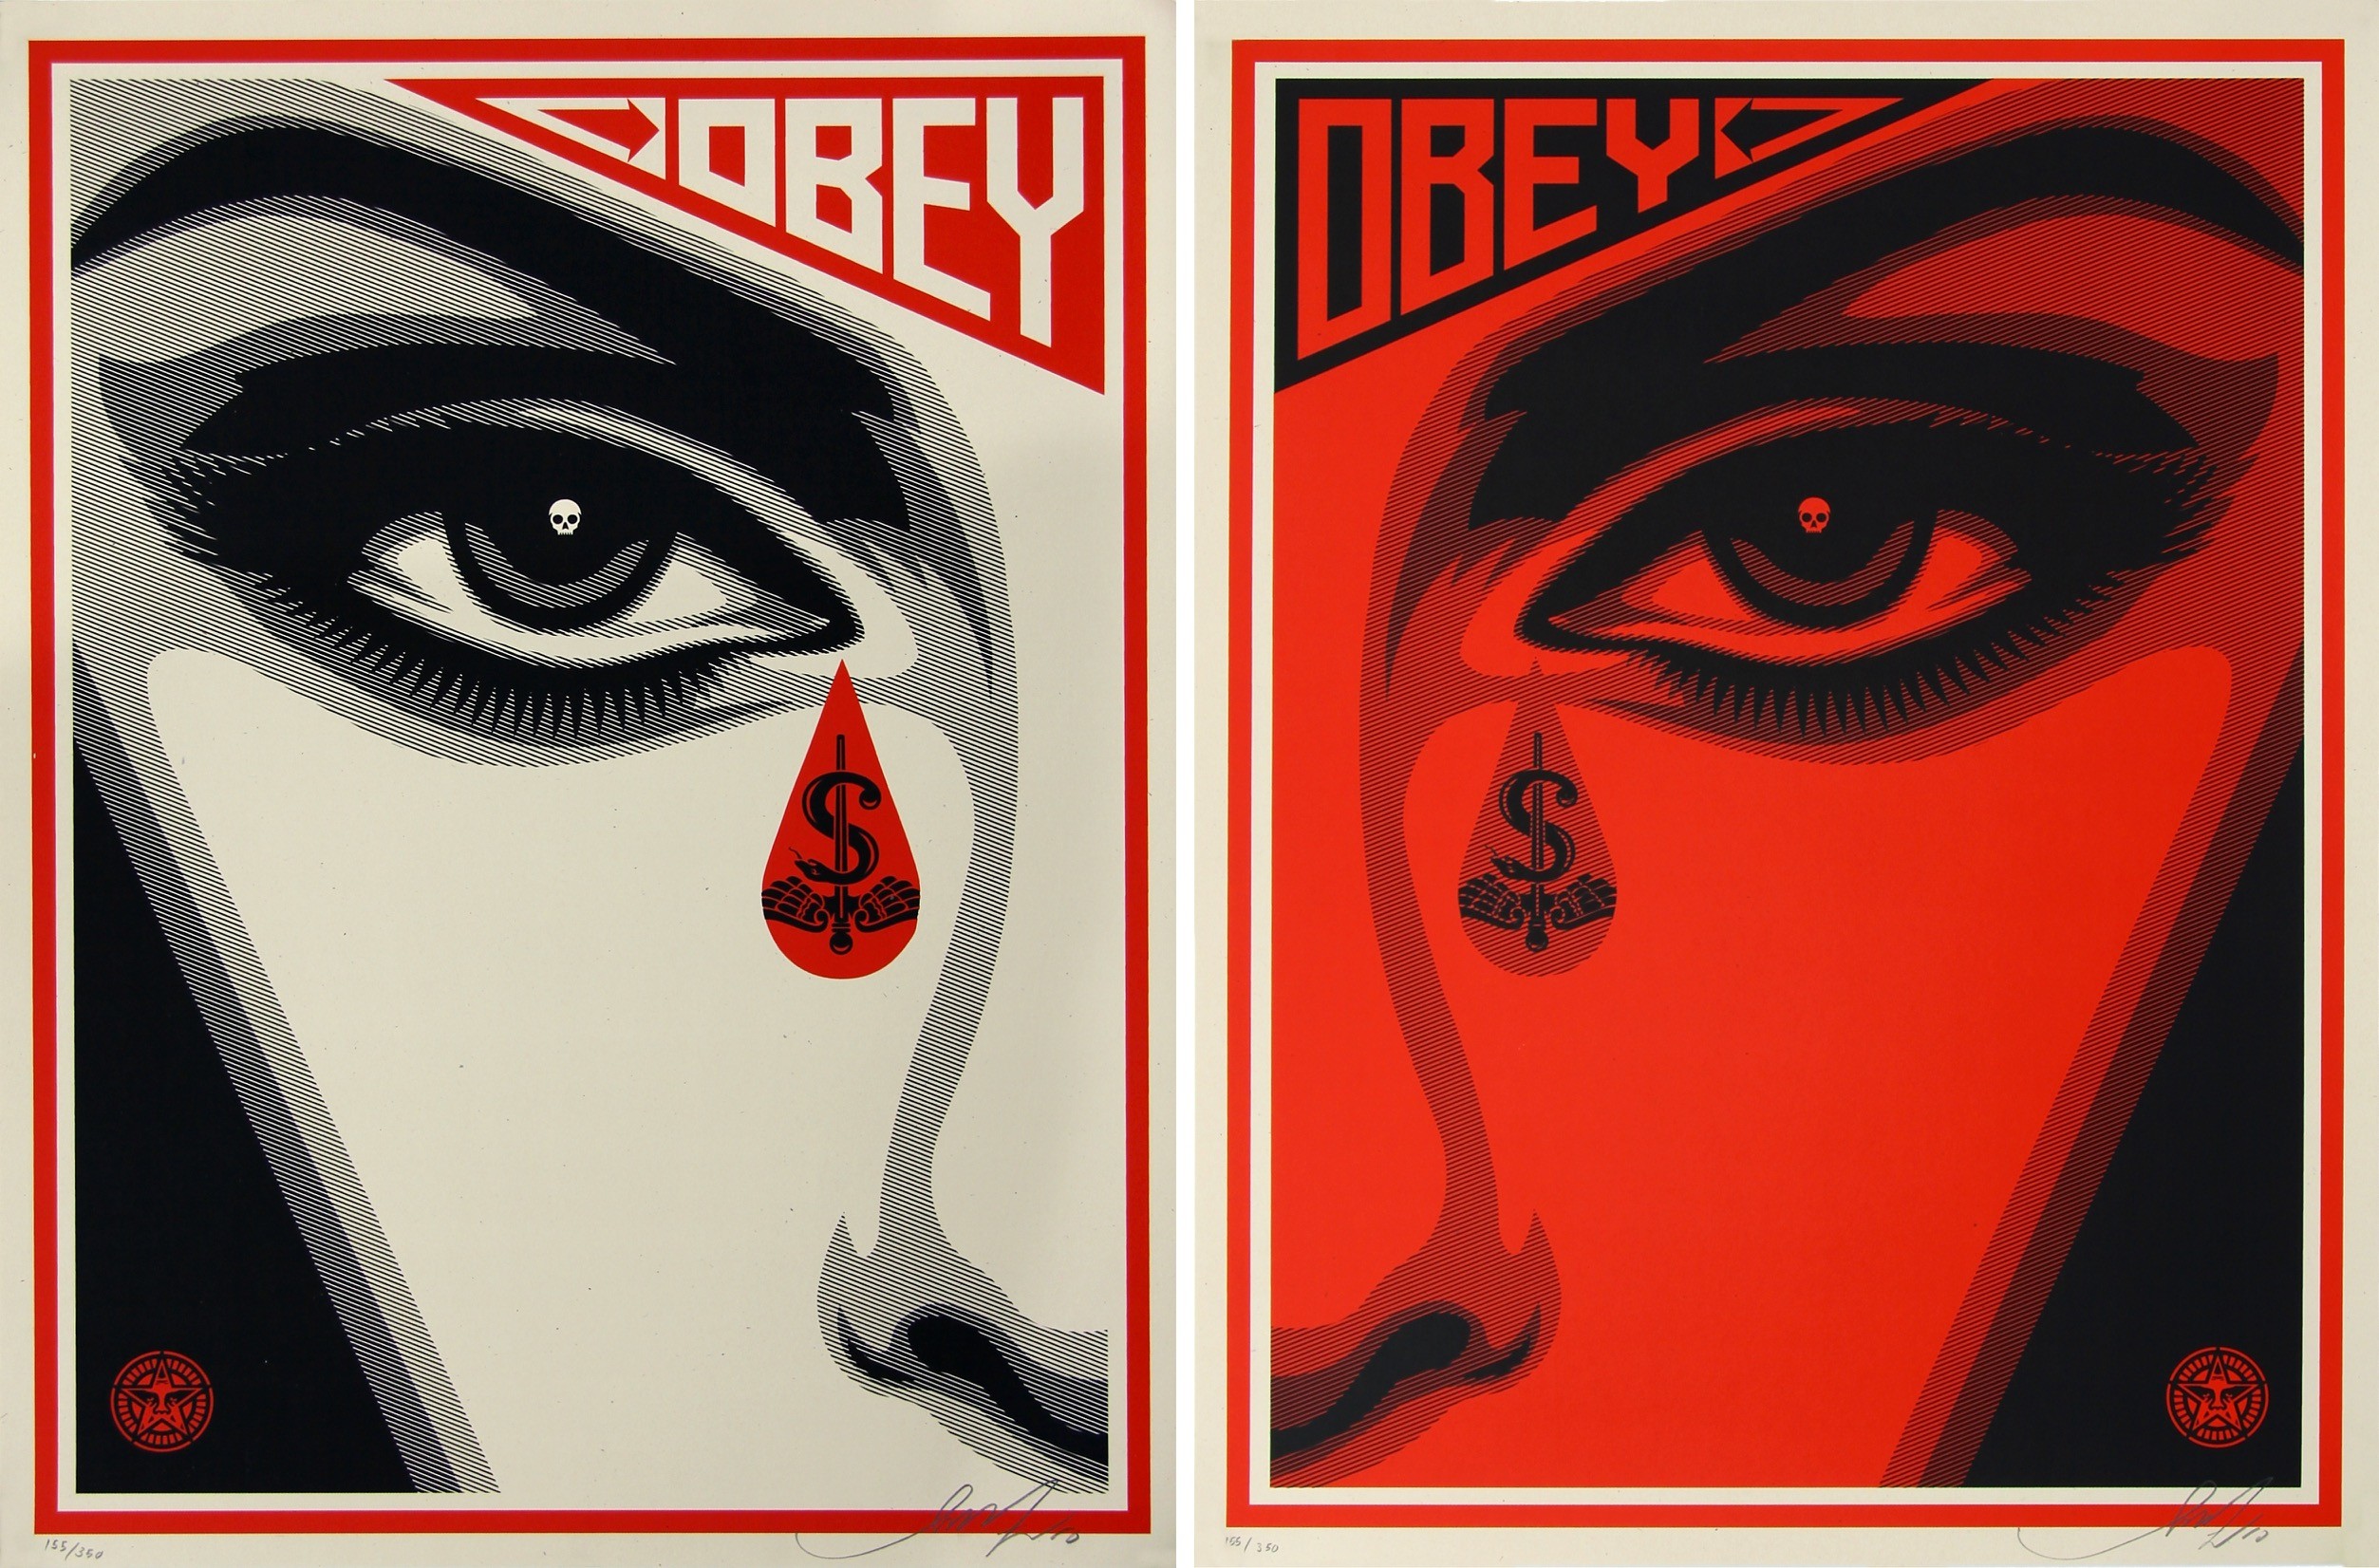 2506x1652 “Question everything” – Shepard Fairey | Addicted Art Gallery | Pulse |  LinkedIn